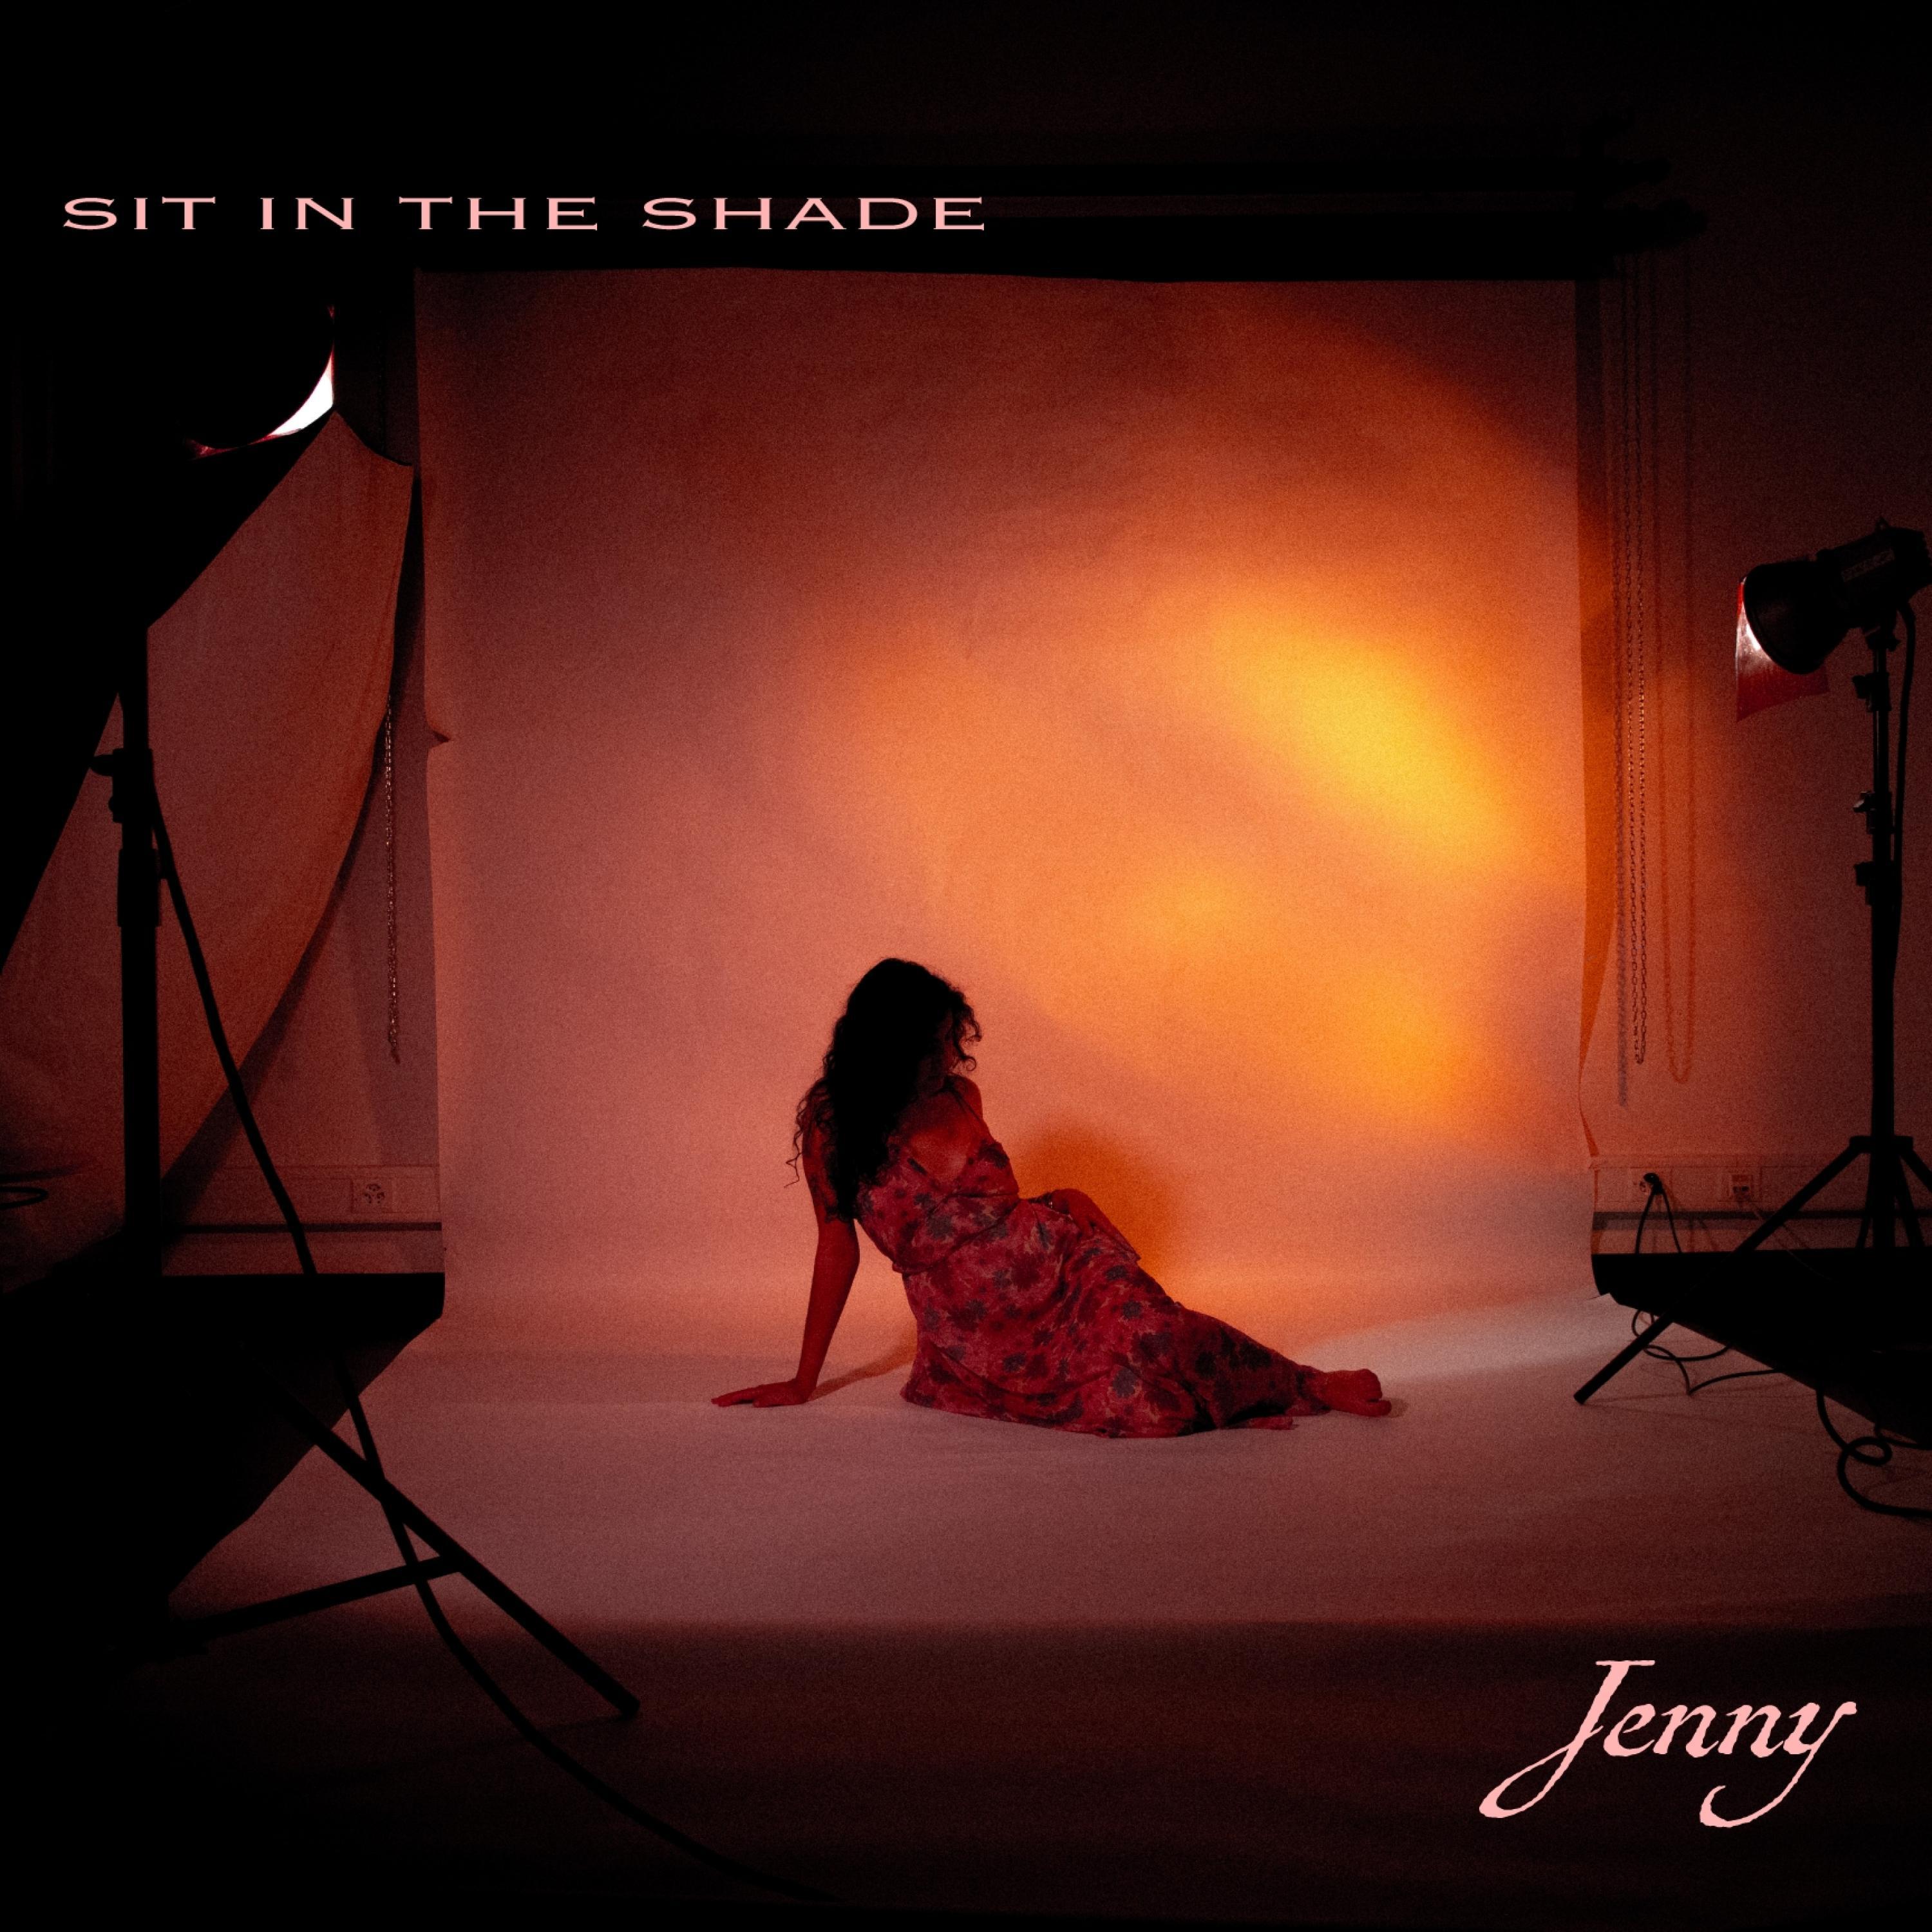 Jenny - Sit in the shade